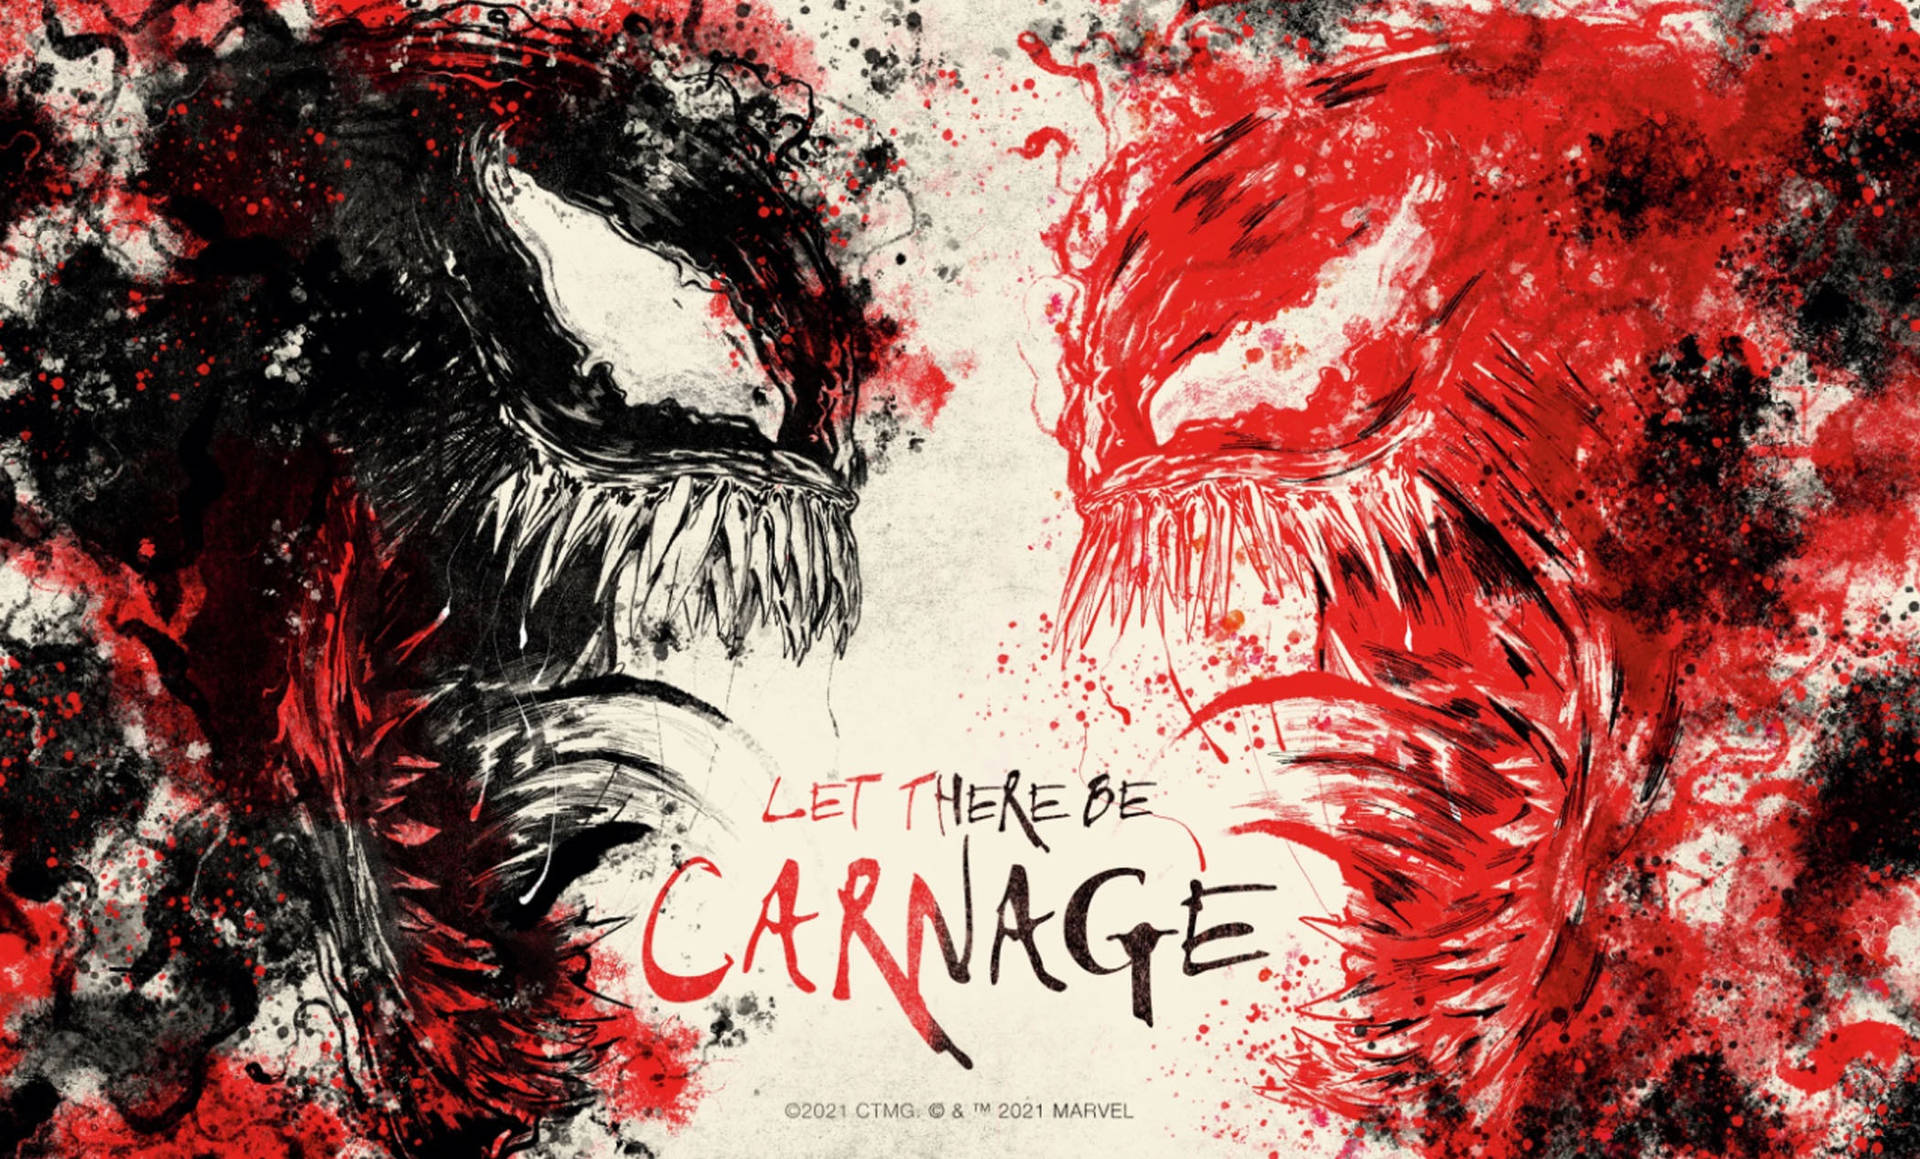 Venom Let There Be Carnage Art Background